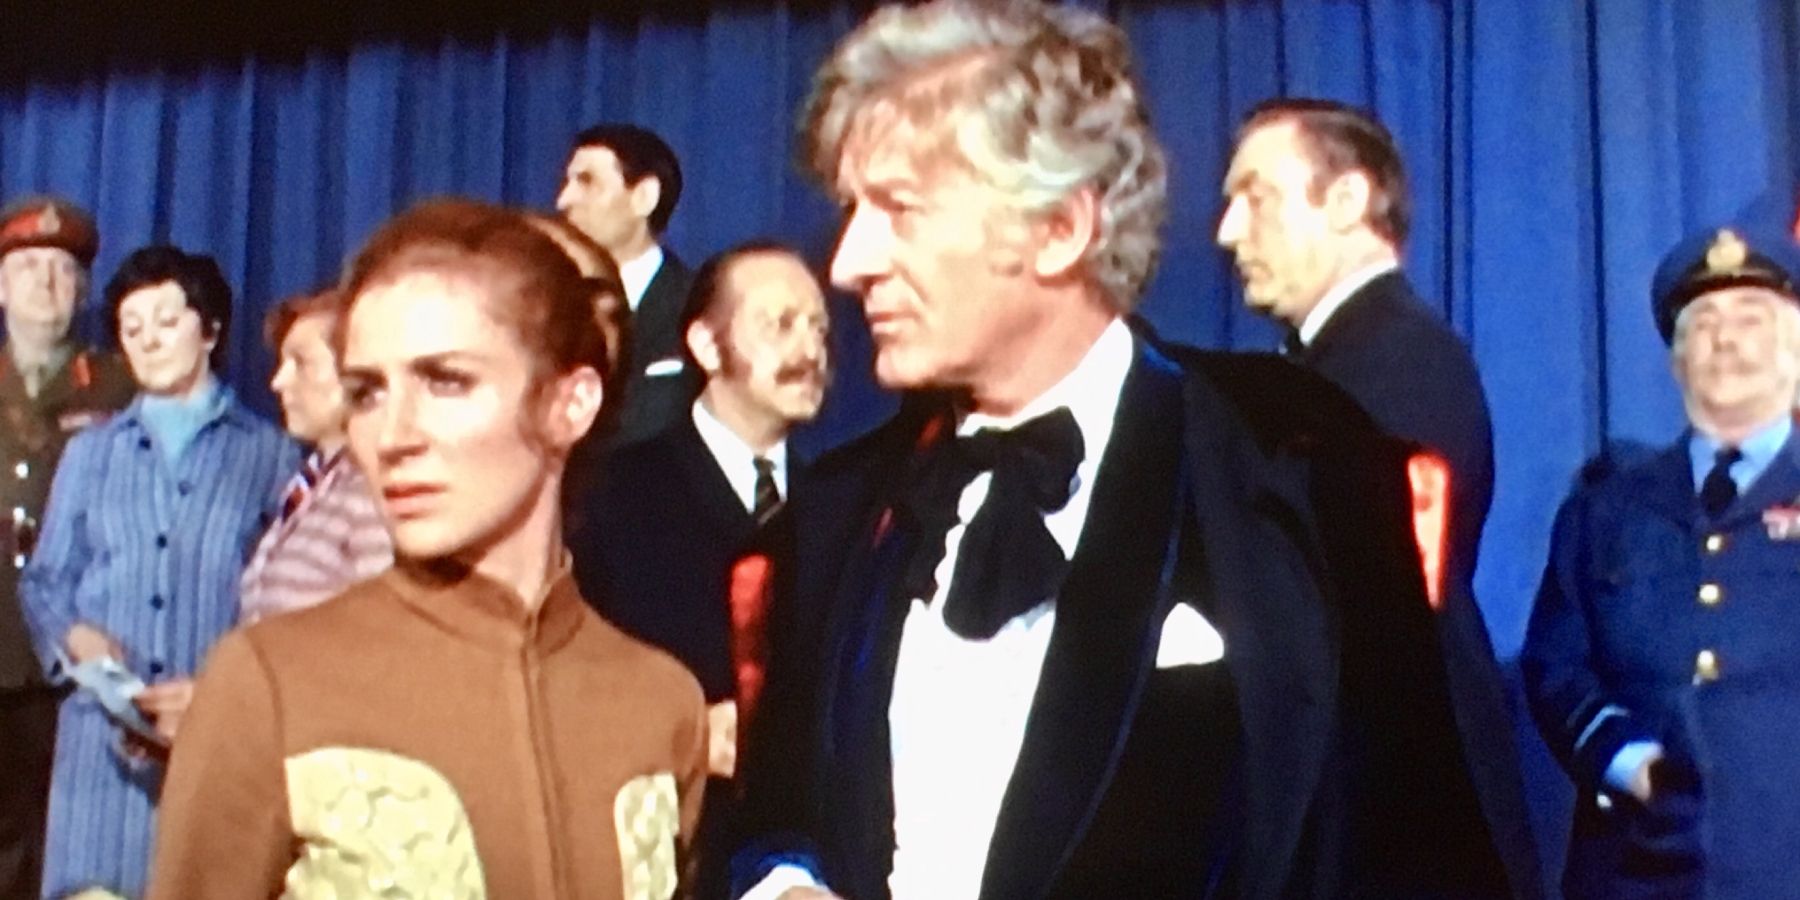 Caroline John and Jon Pertwee as Liz Shaw and the Third Doctor surrounded by waxworks